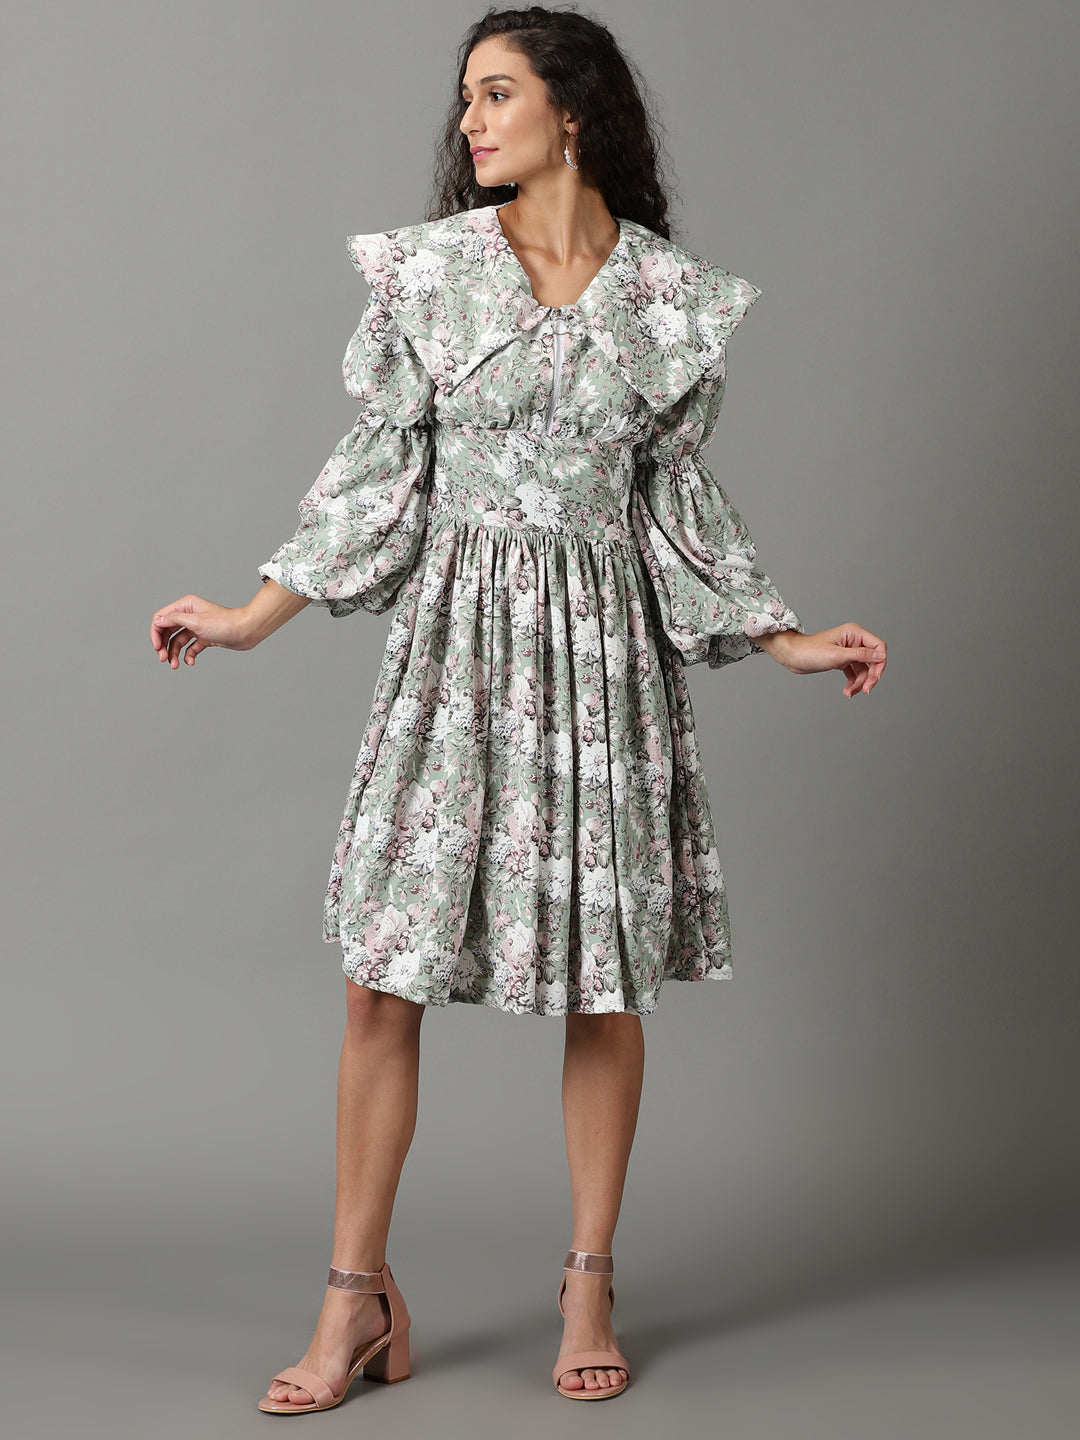 Women's Sea Green Printed Fit and Flare Dress